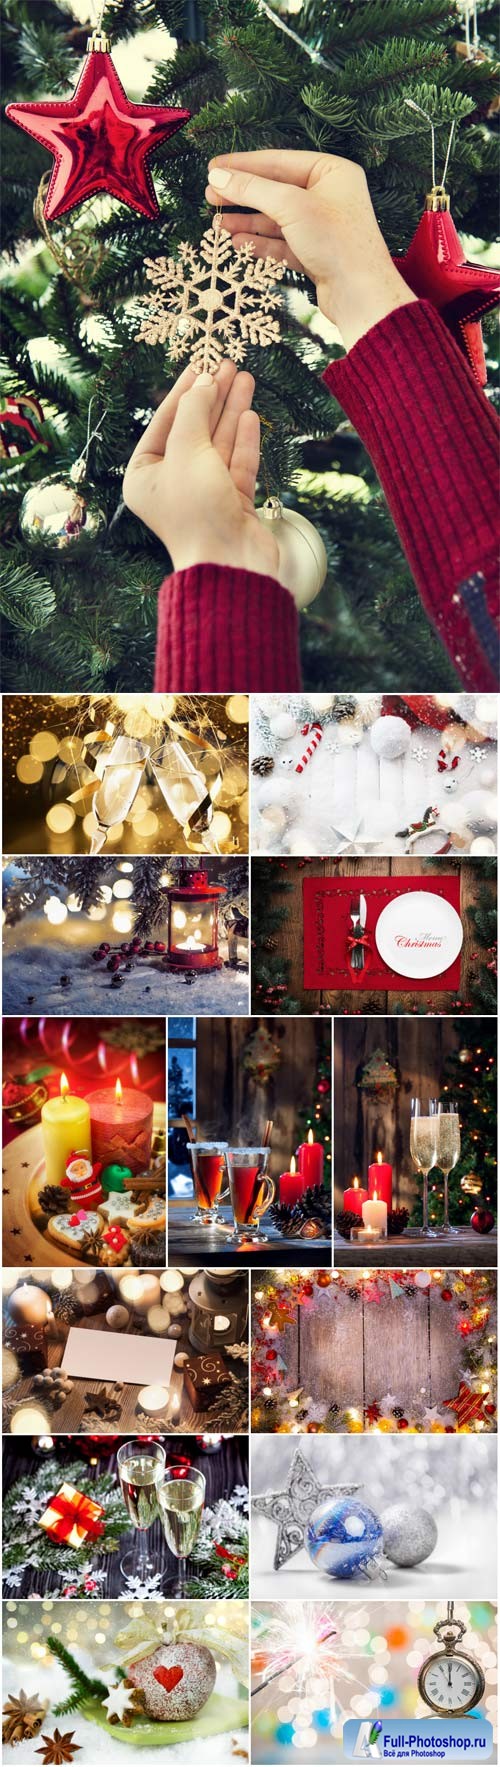 New Year and Christmas stock photos 58